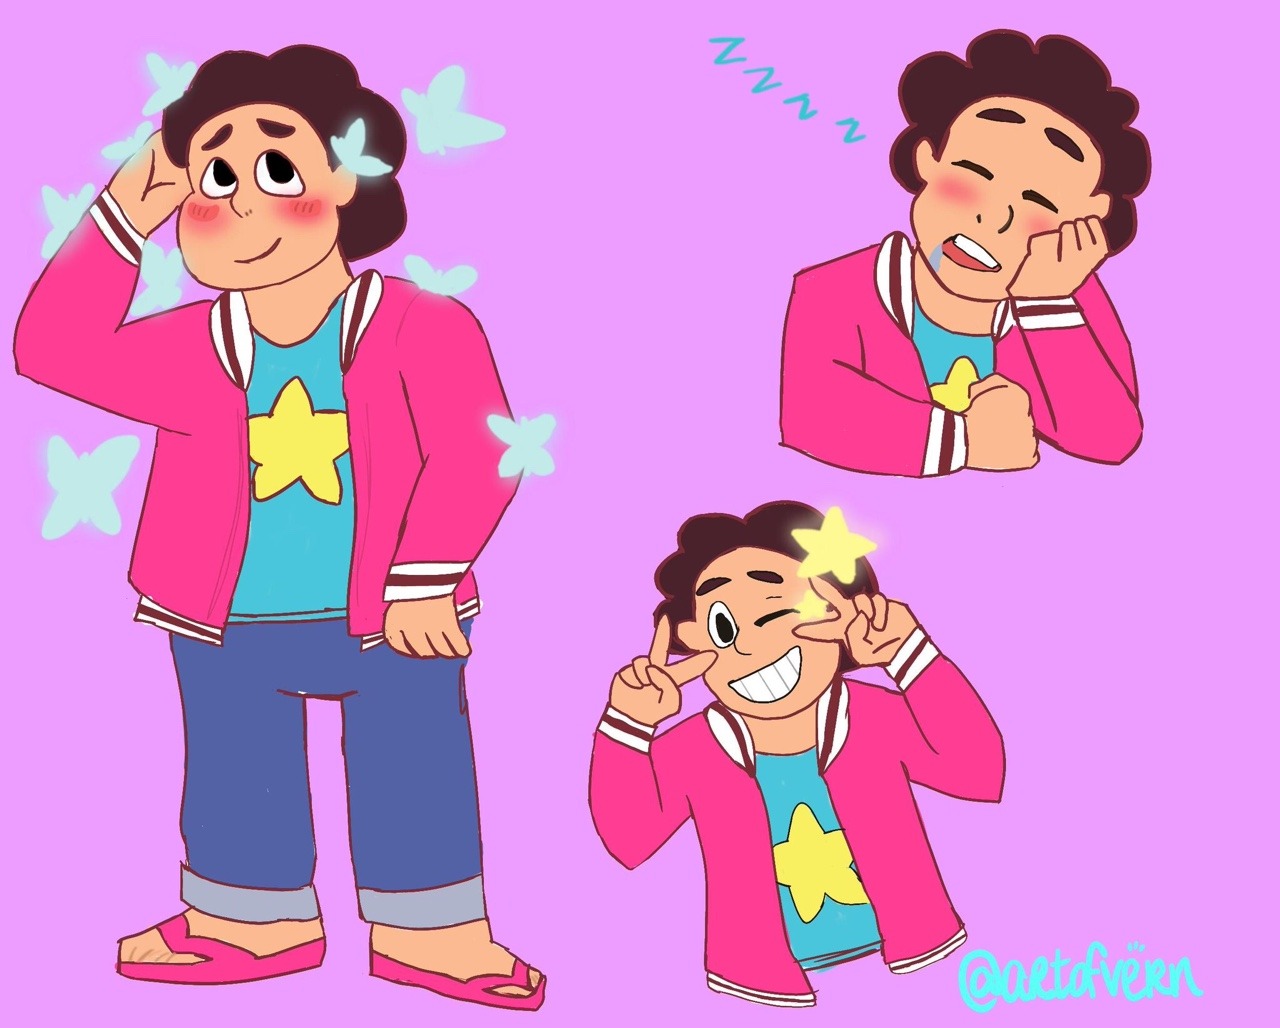 Steven has a neck everyone ,,,
I had to draw our boy LOOK HOW HE’S GROWN !!!